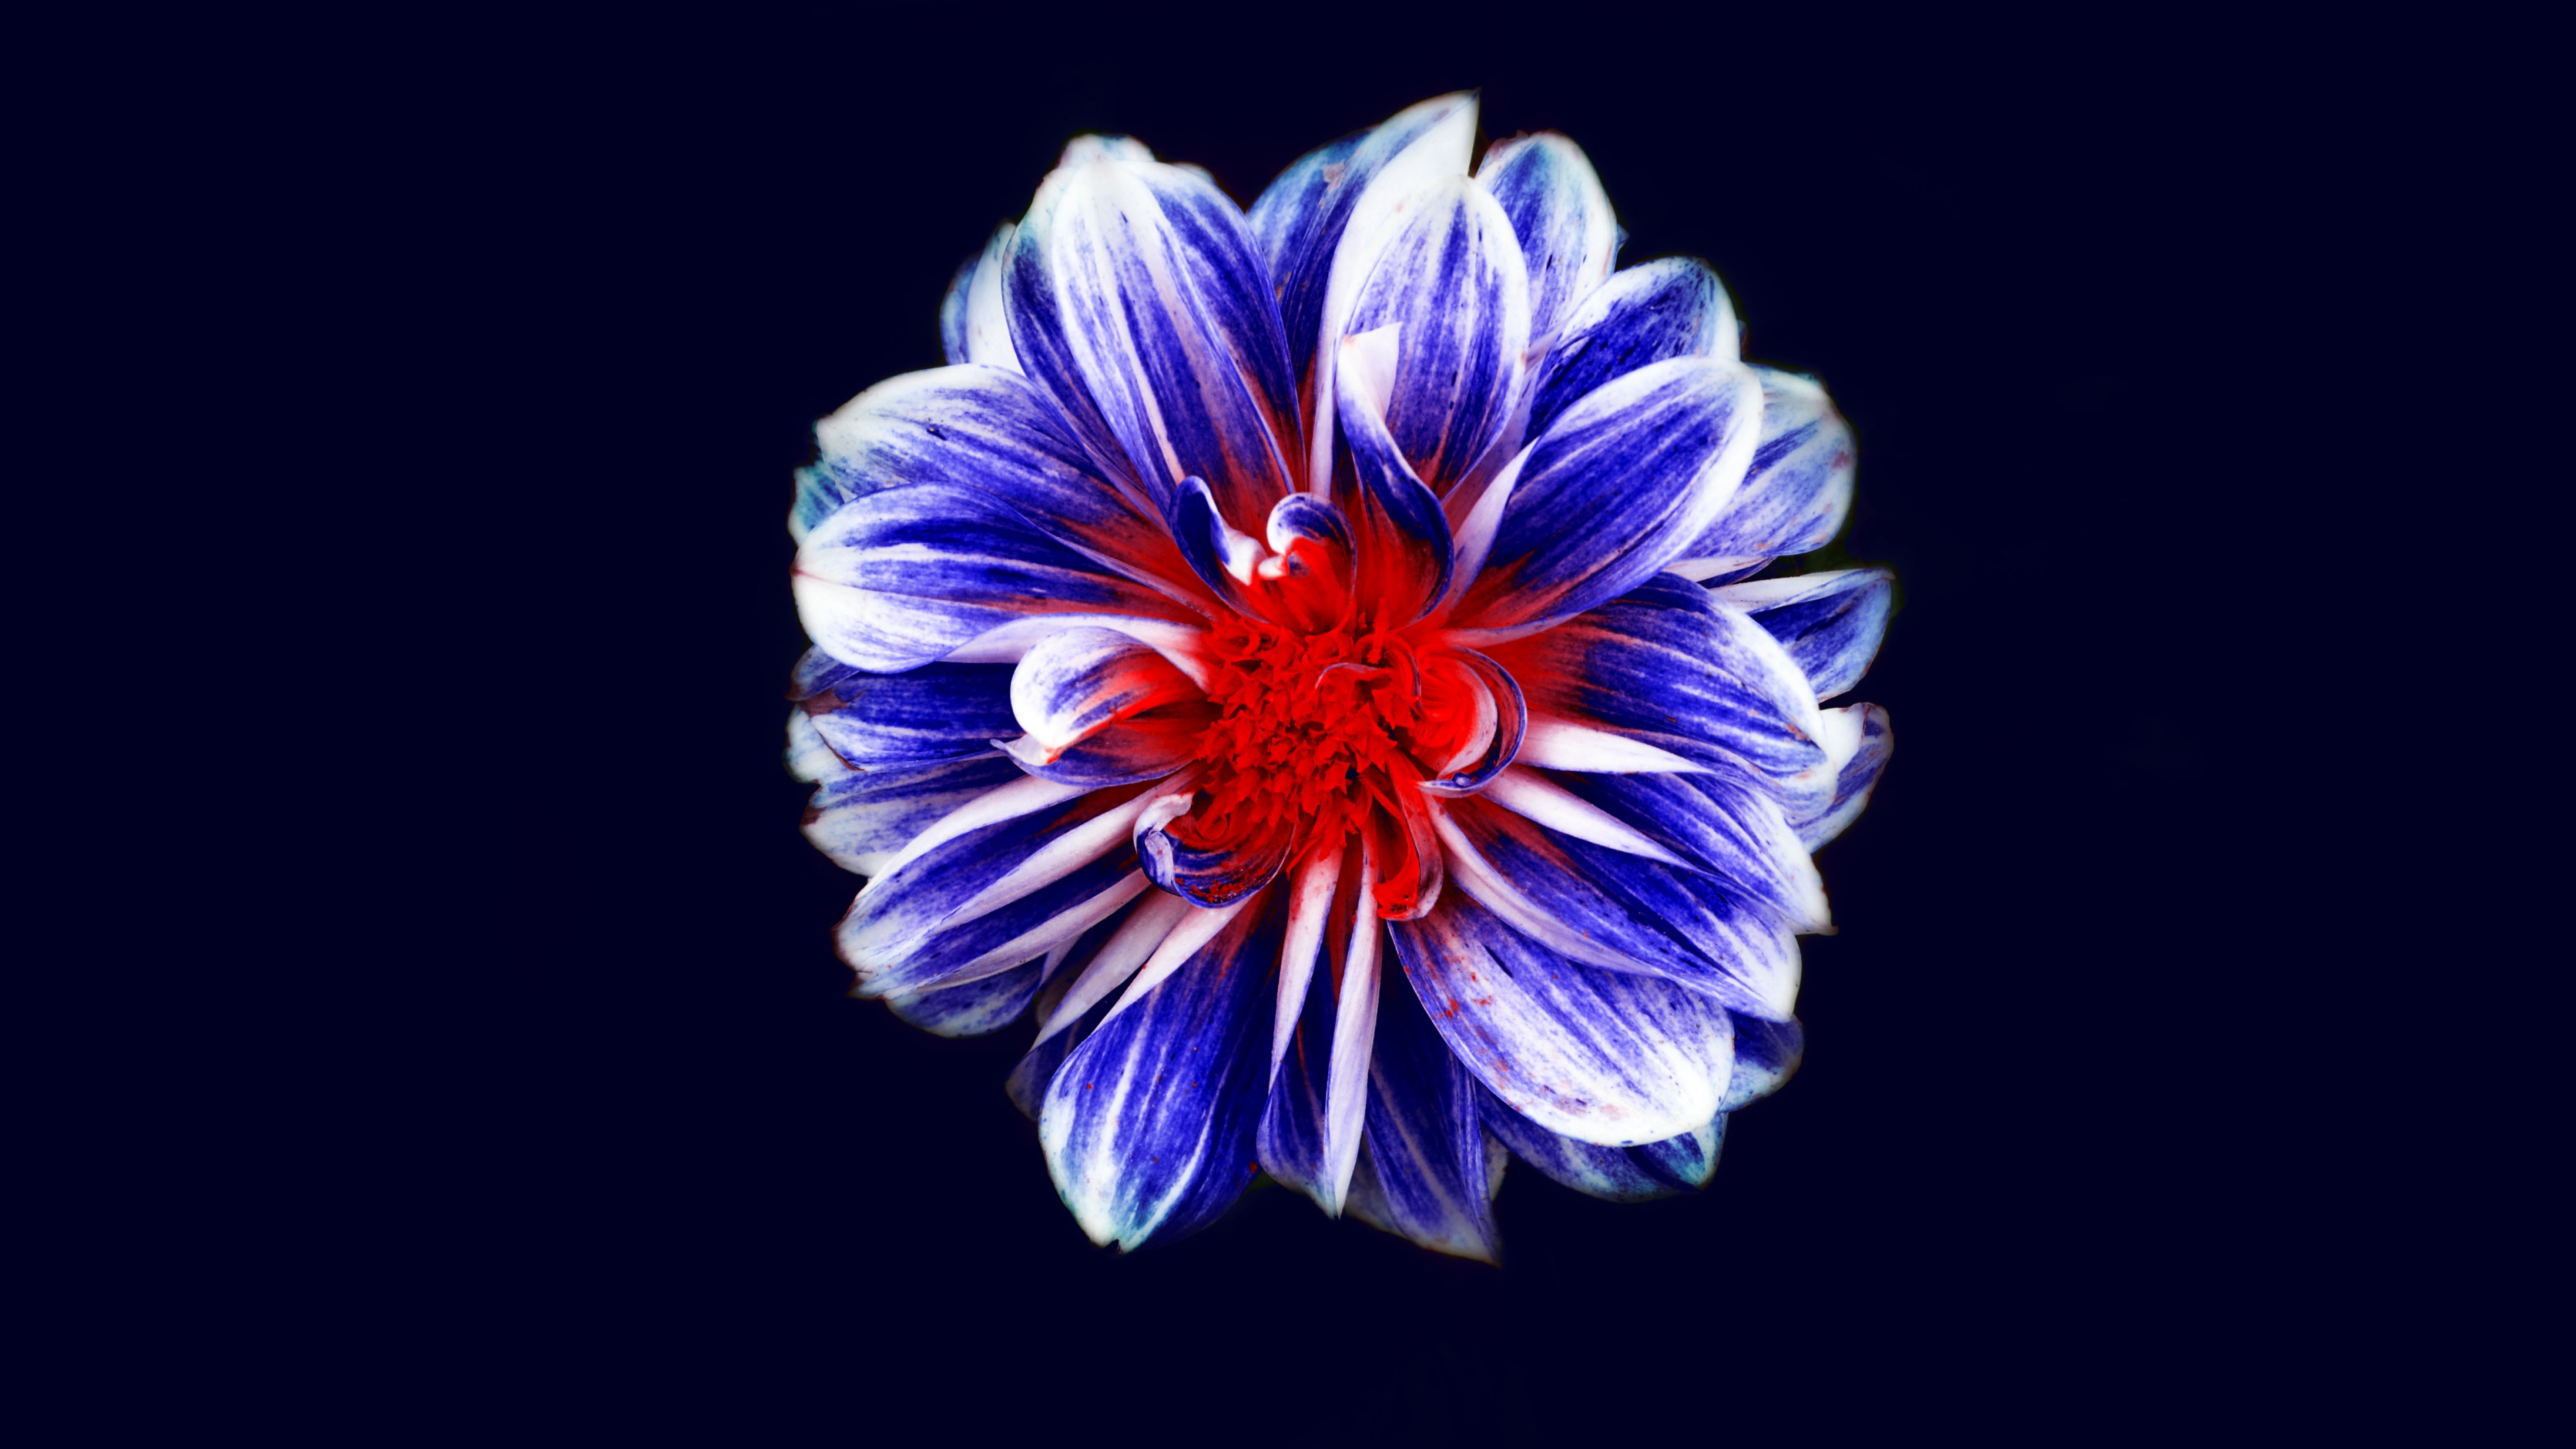 Purple and White Flower in Black Background. Wallpaper in 3840x2160 Resolution